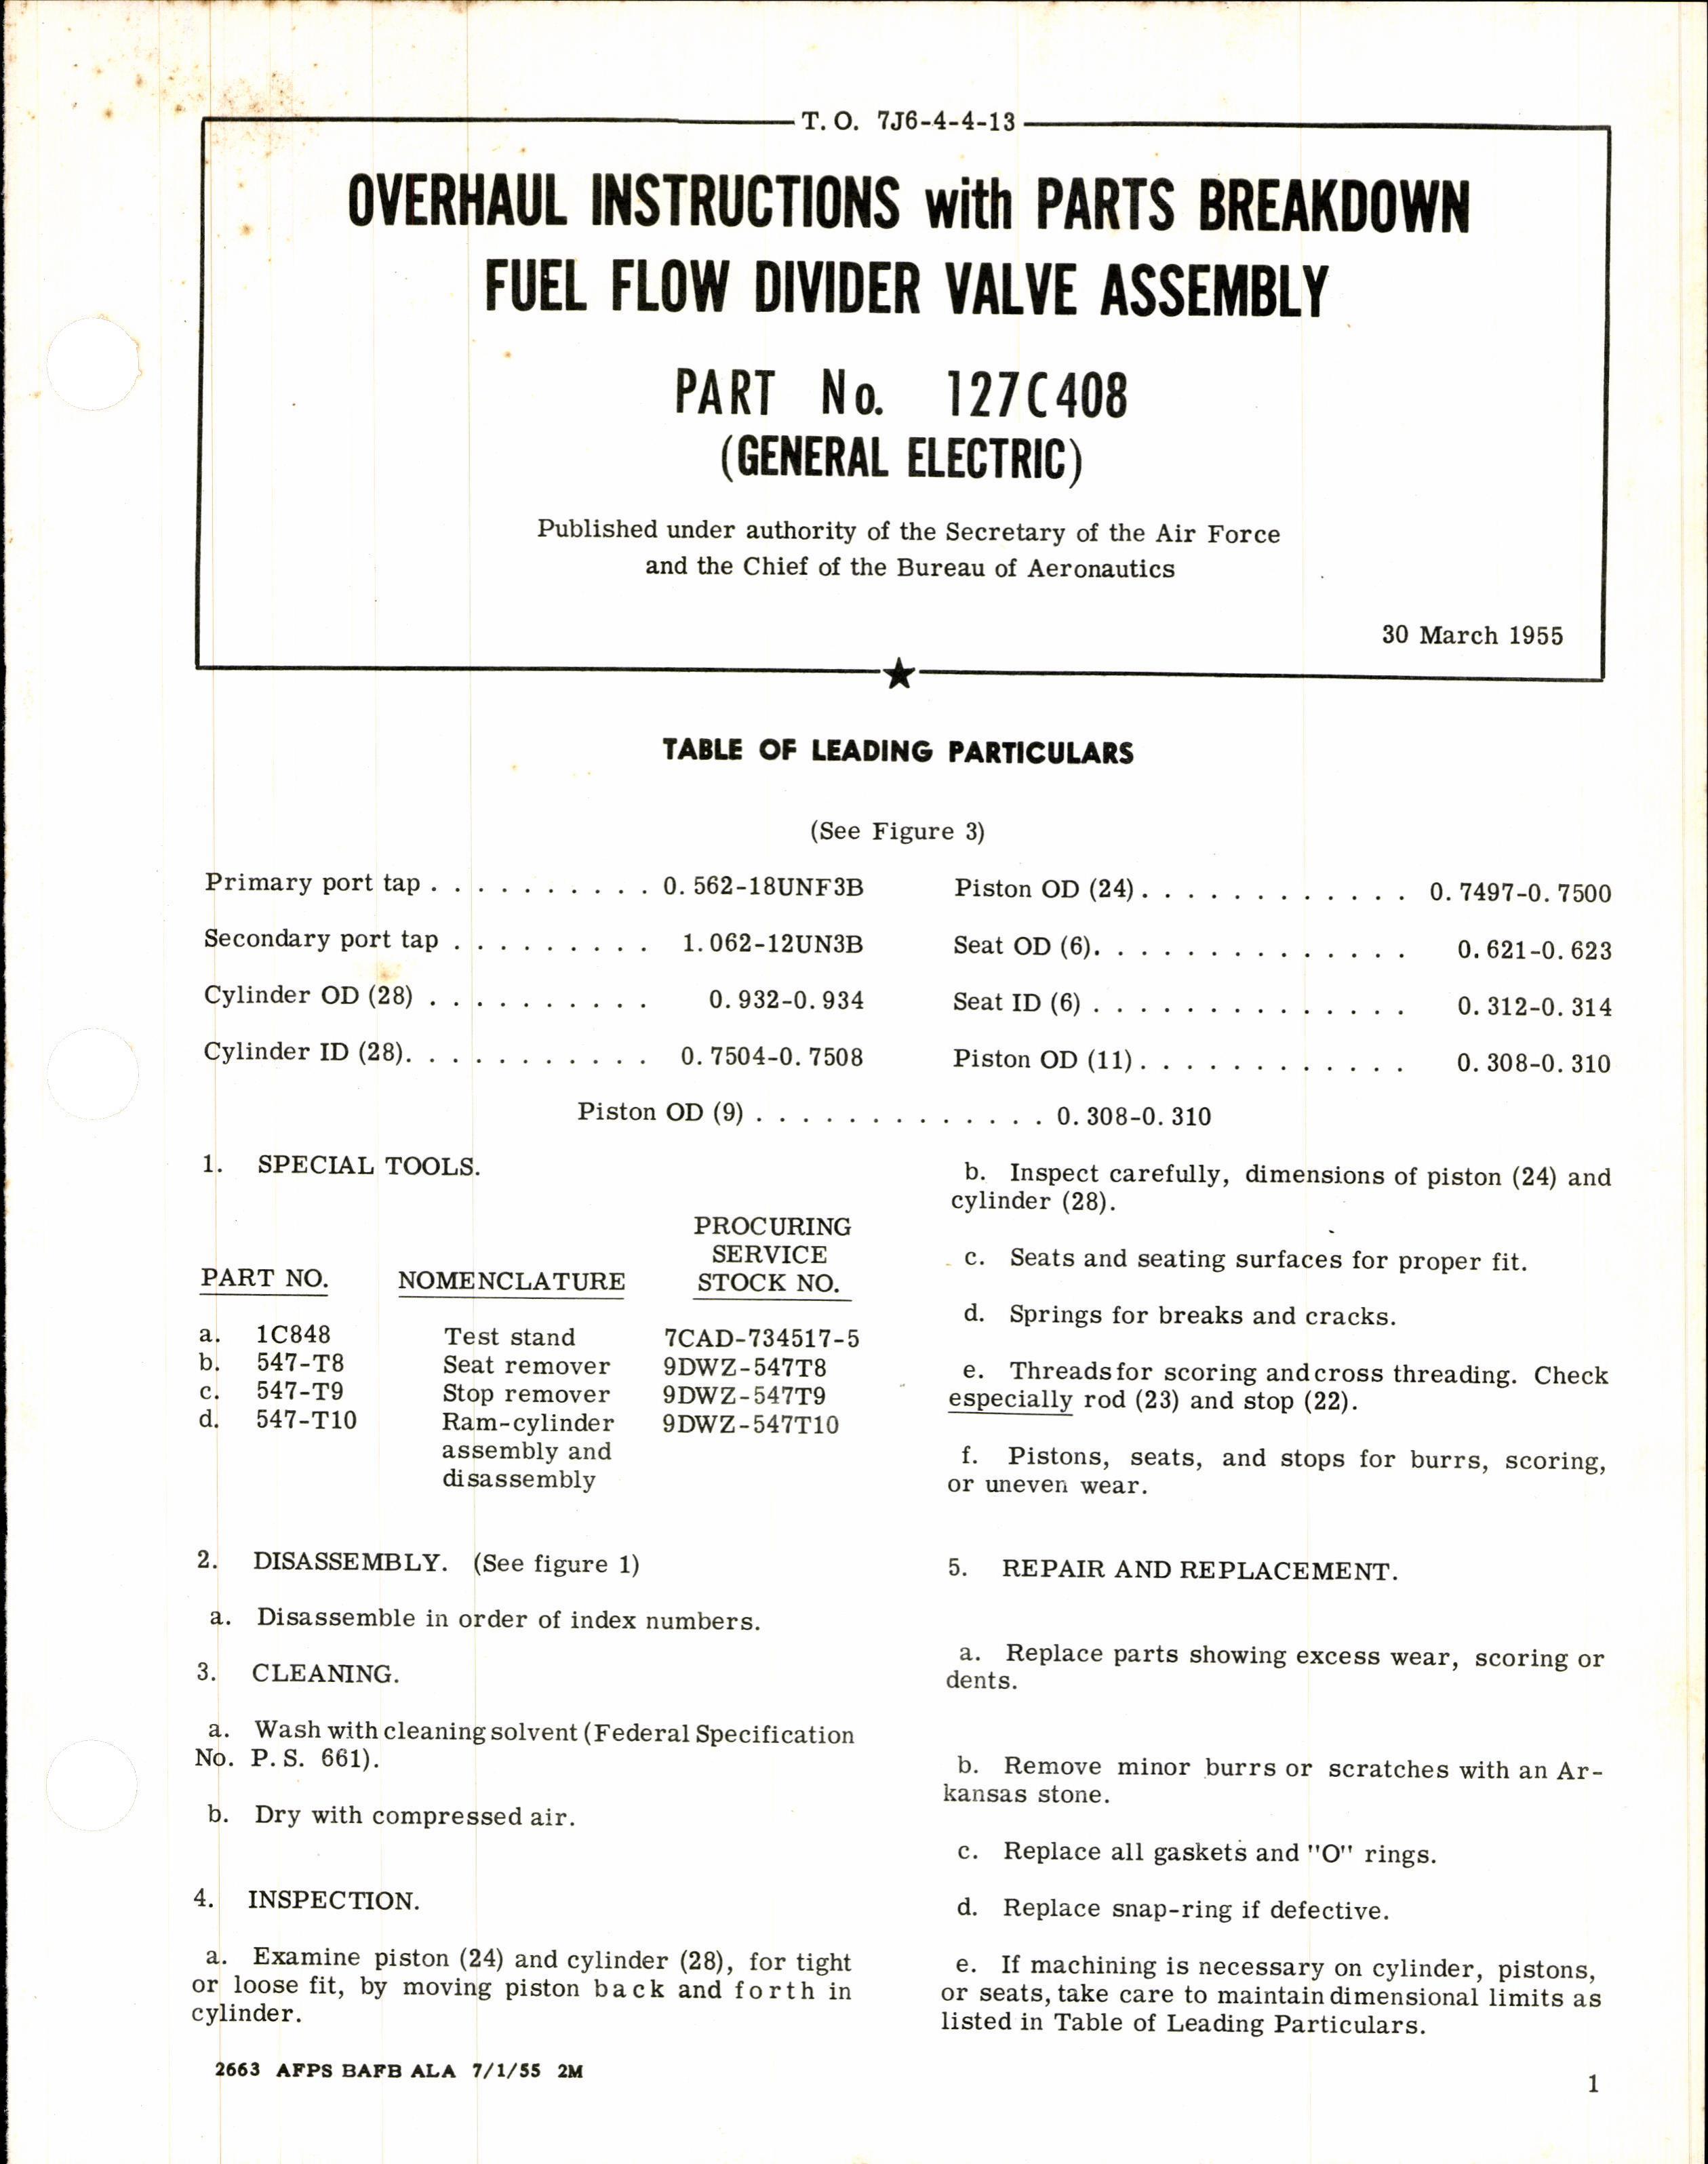 Sample page 1 from AirCorps Library document: Fuel Flow Divider Valve Assembly